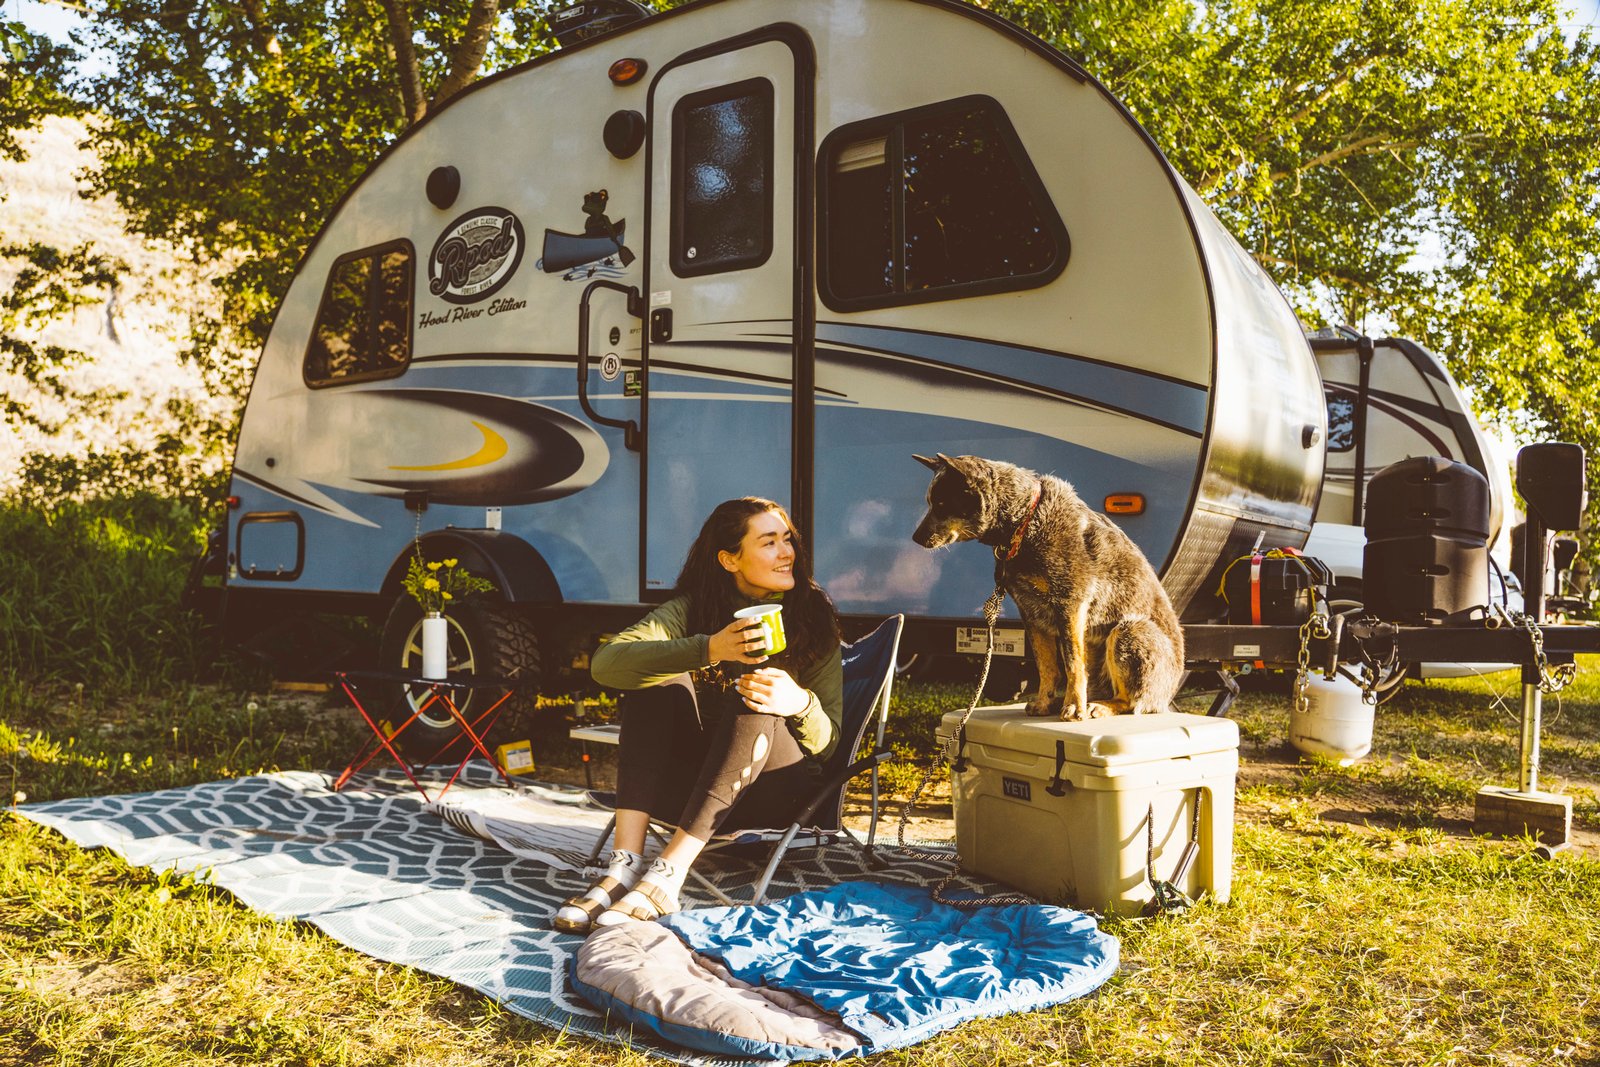 A woman camping with her dog sitting on the ground in front of their RV.